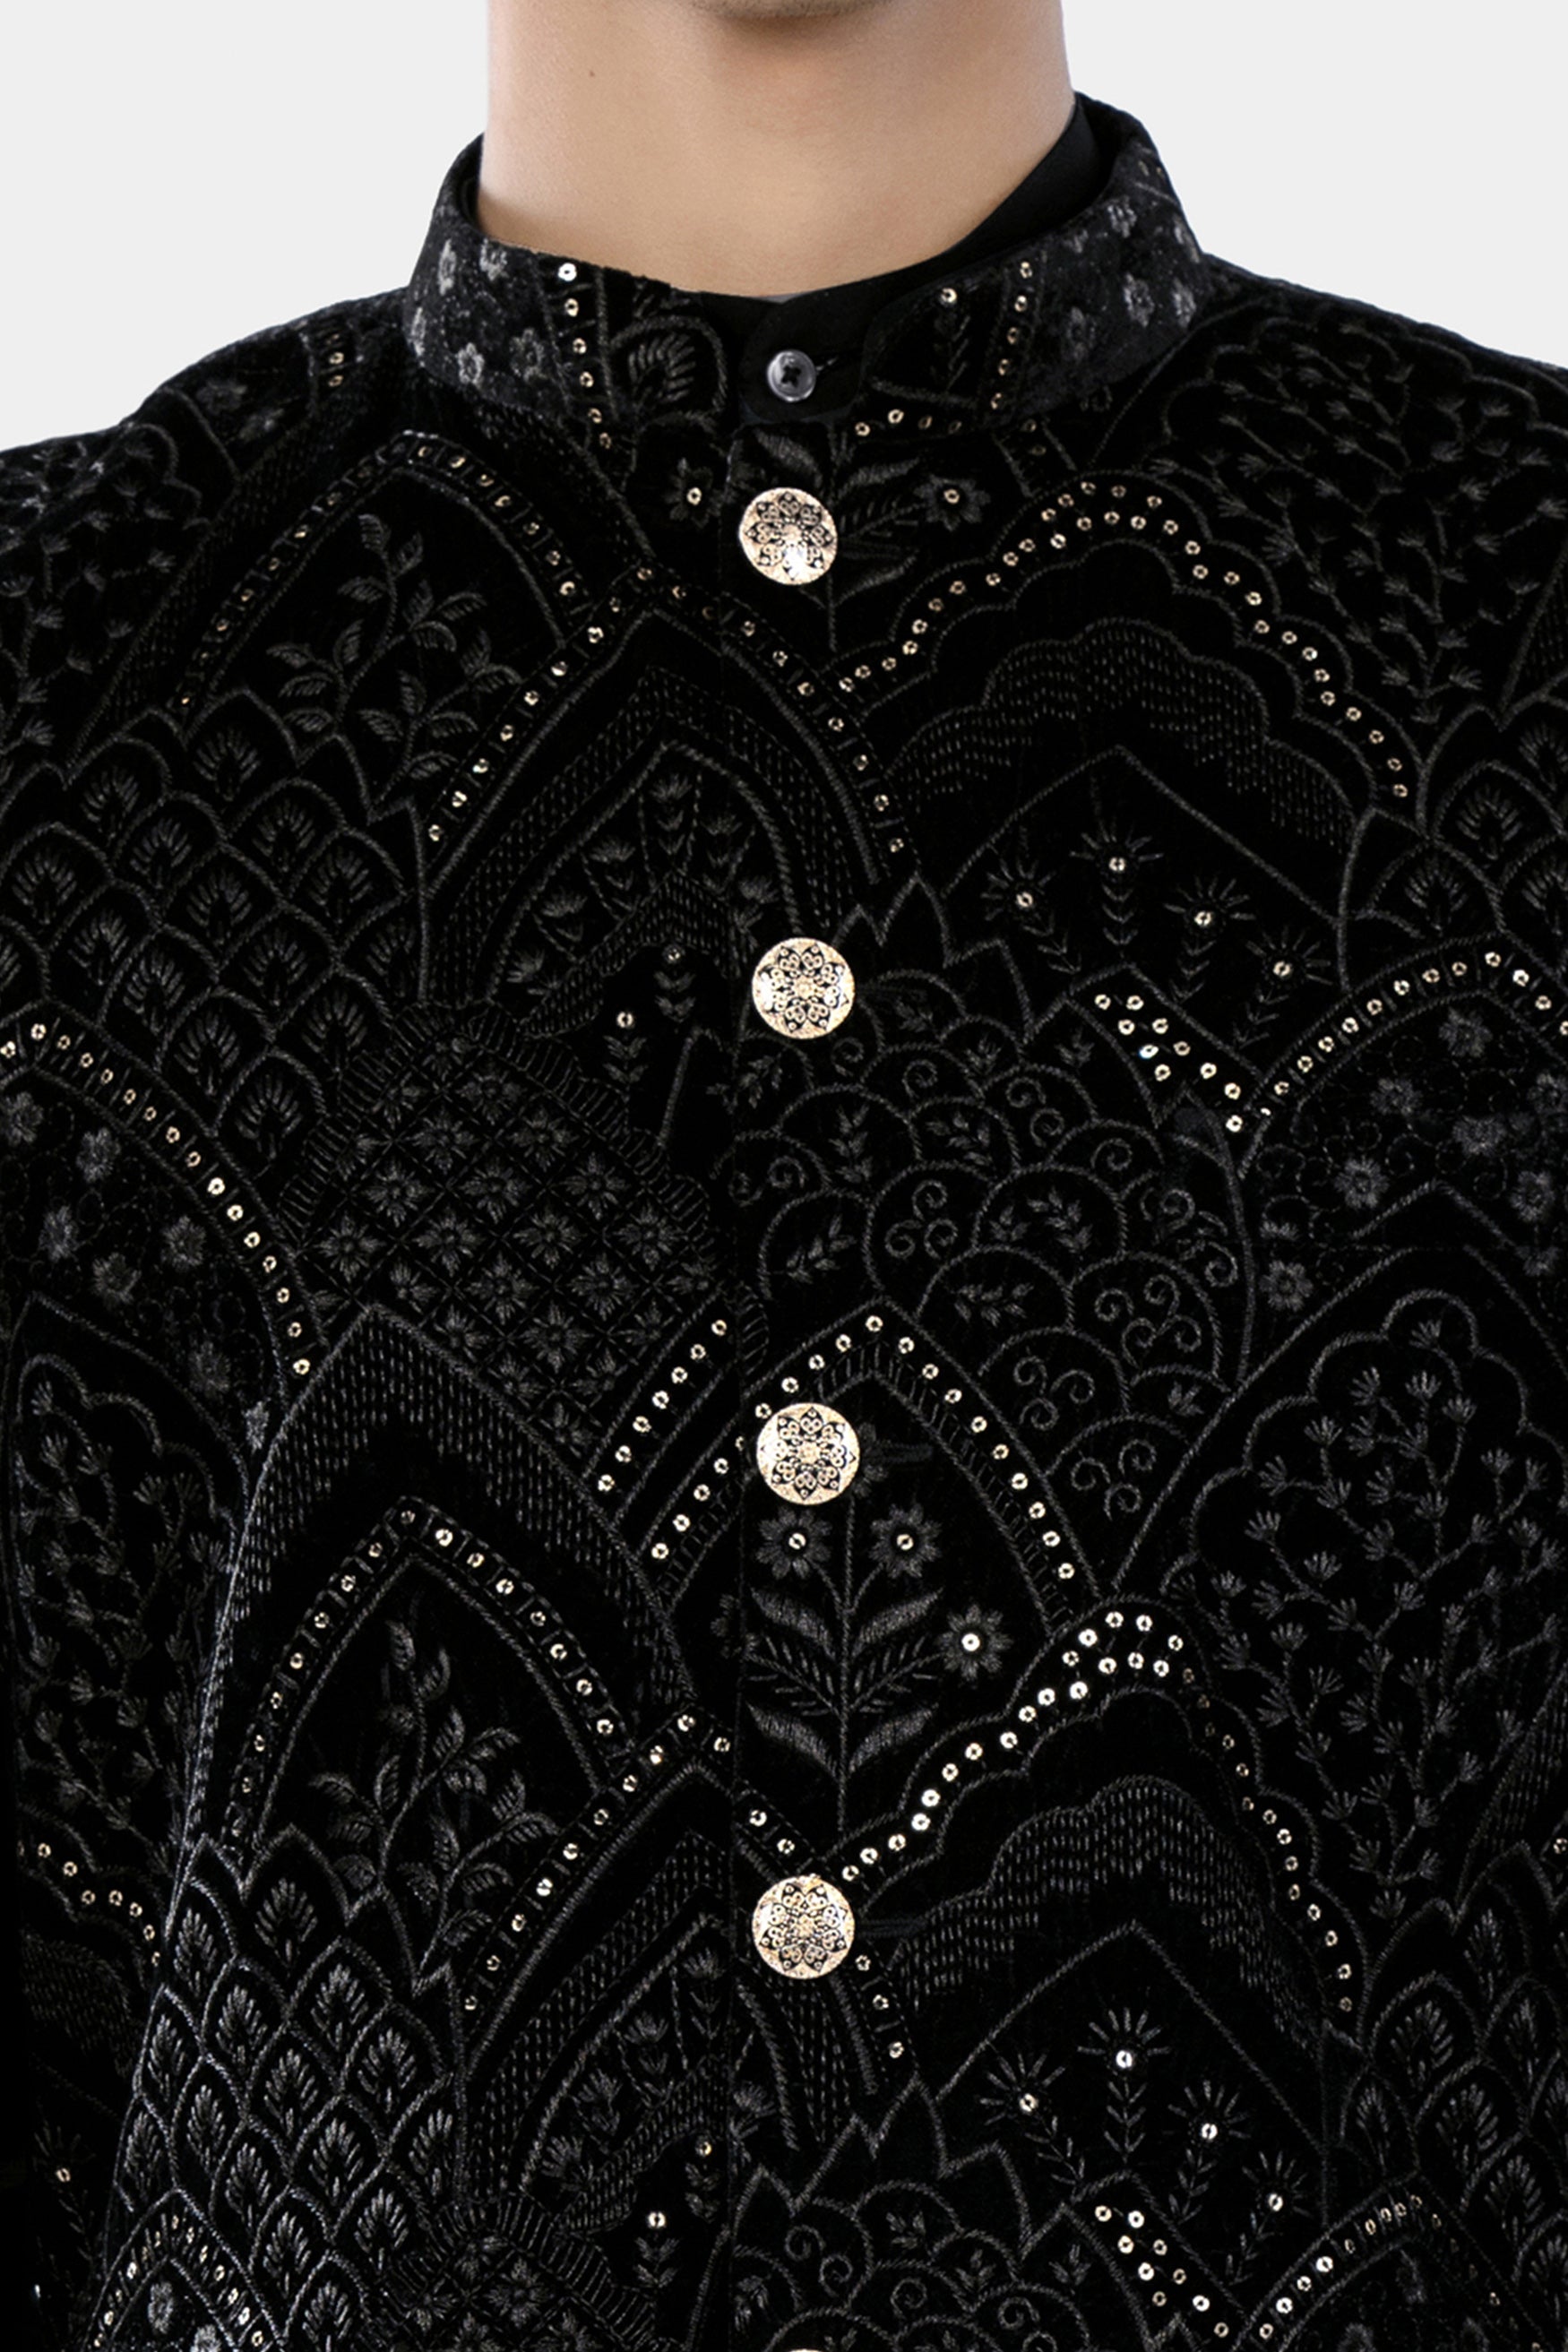 Jade Black Floral Sequin and Thread Embroidered Designer Nehru Jacket WC3466-36,  WC3466-38,  WC3466-40,  WC3466-42,  WC3466-44,  WC3466-46,  WC3466-48,  WC3466-50,  WC3466-52,  WC3466-54,  WC3466-56,  WC3466-58,  WC3466-60